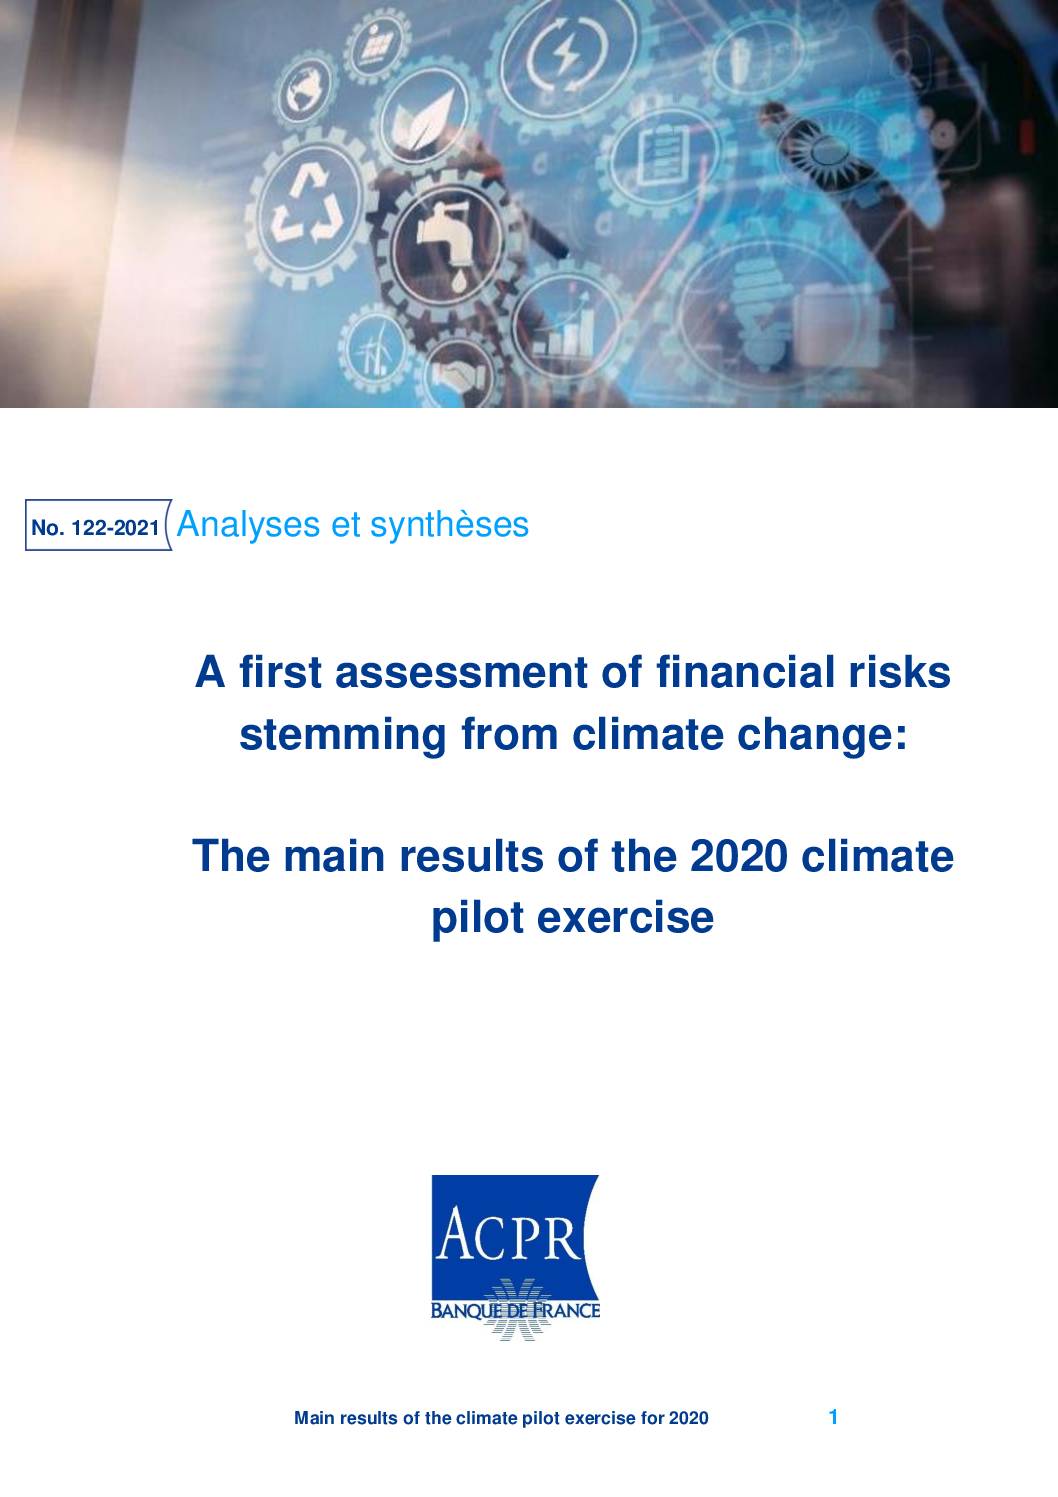 A First Assessment of Financial Risks Stemming from Climate Change: Results of the 2020 Climate Pilot Exercise